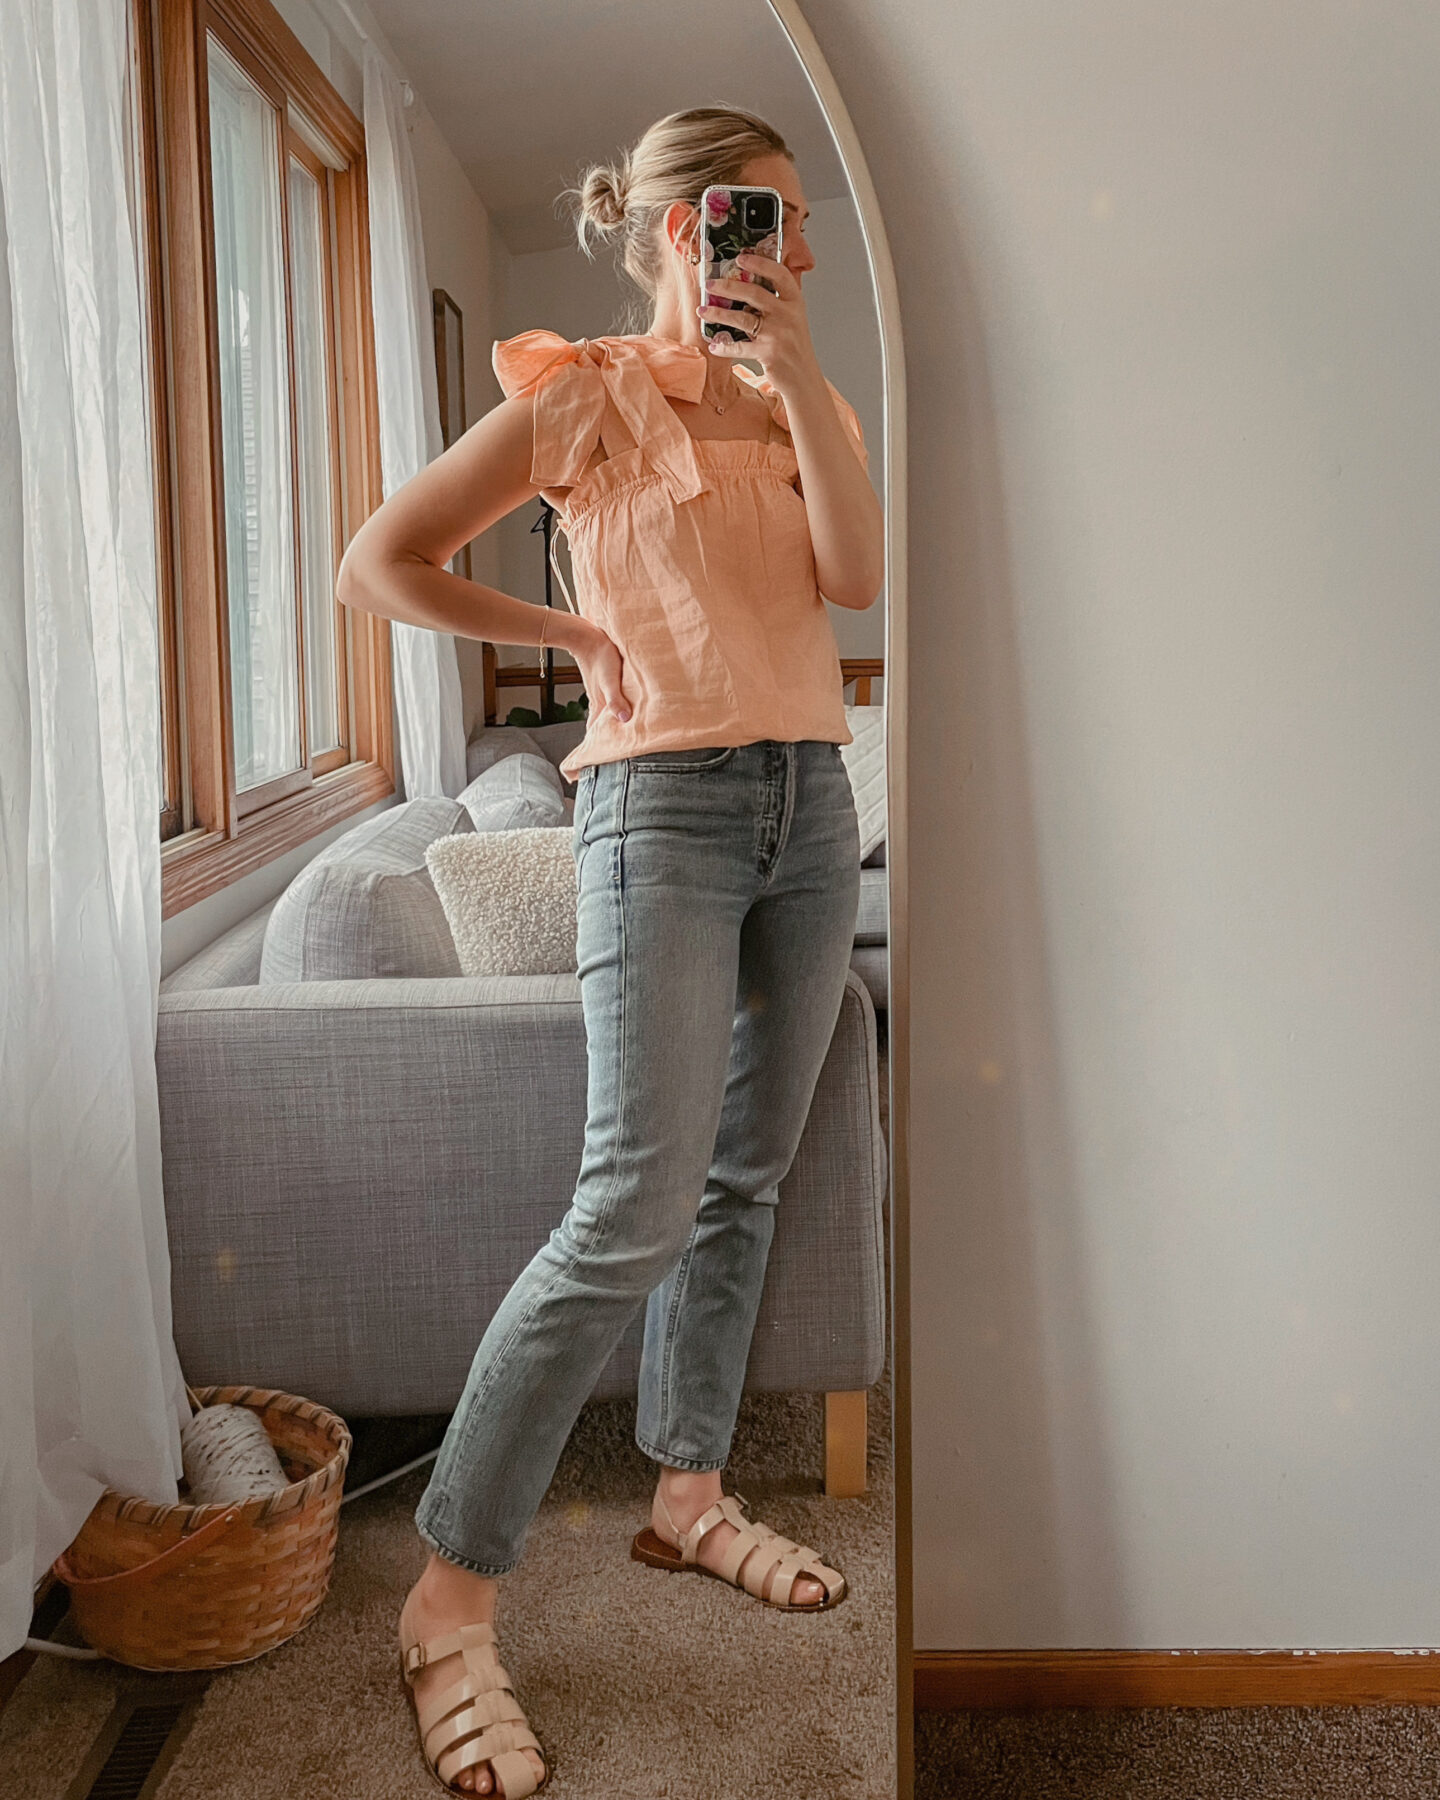 Karin Emily wears a linen coral tank top for spring with light wash jeans and fisherman sandals